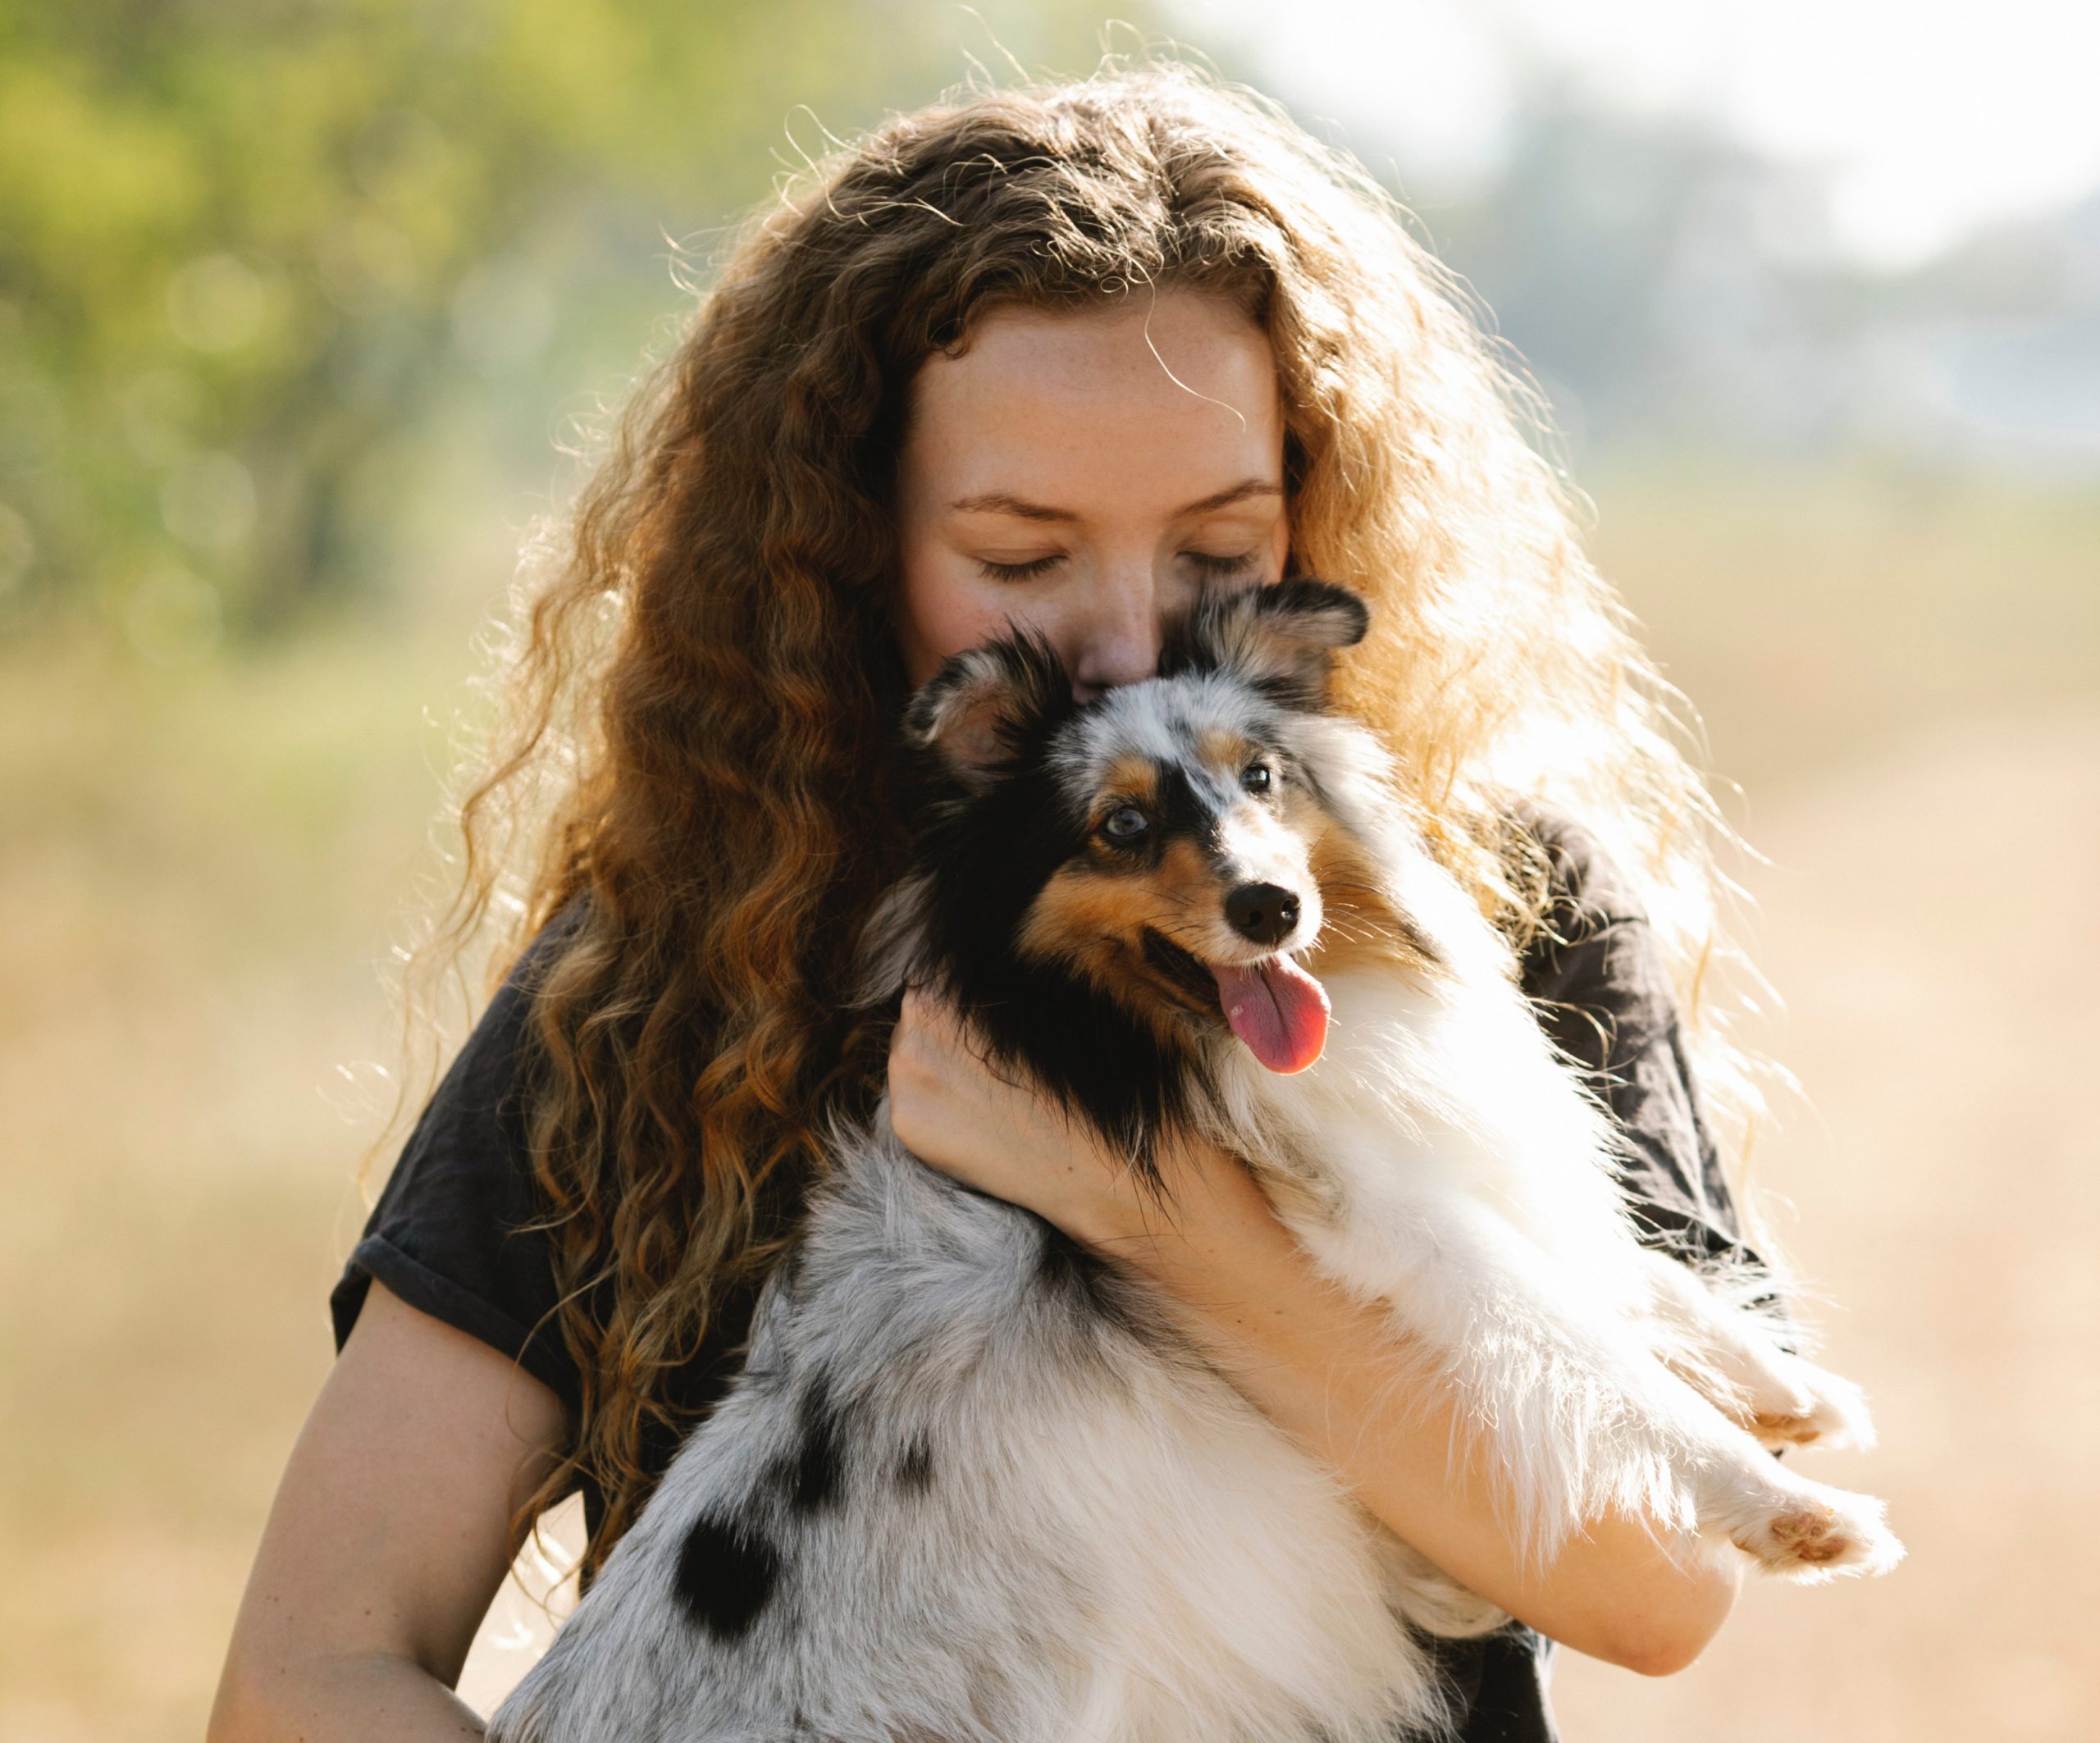 Where should we start with pet insurance? Advice from Christina Bailey